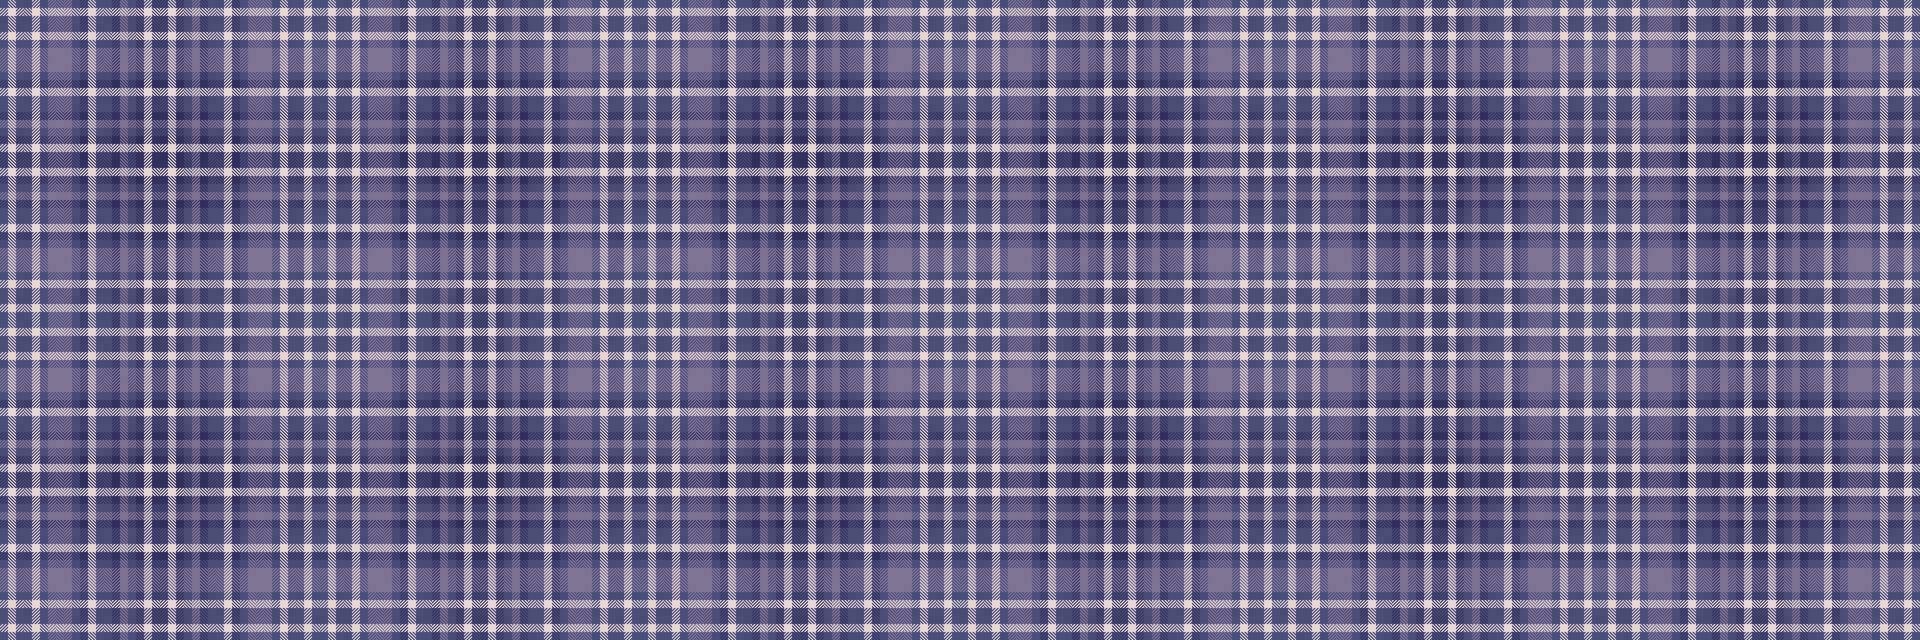 Ornamental background plaid seamless, scarf vector tartan fabric. Funky textile texture check pattern in indigo and light colors.